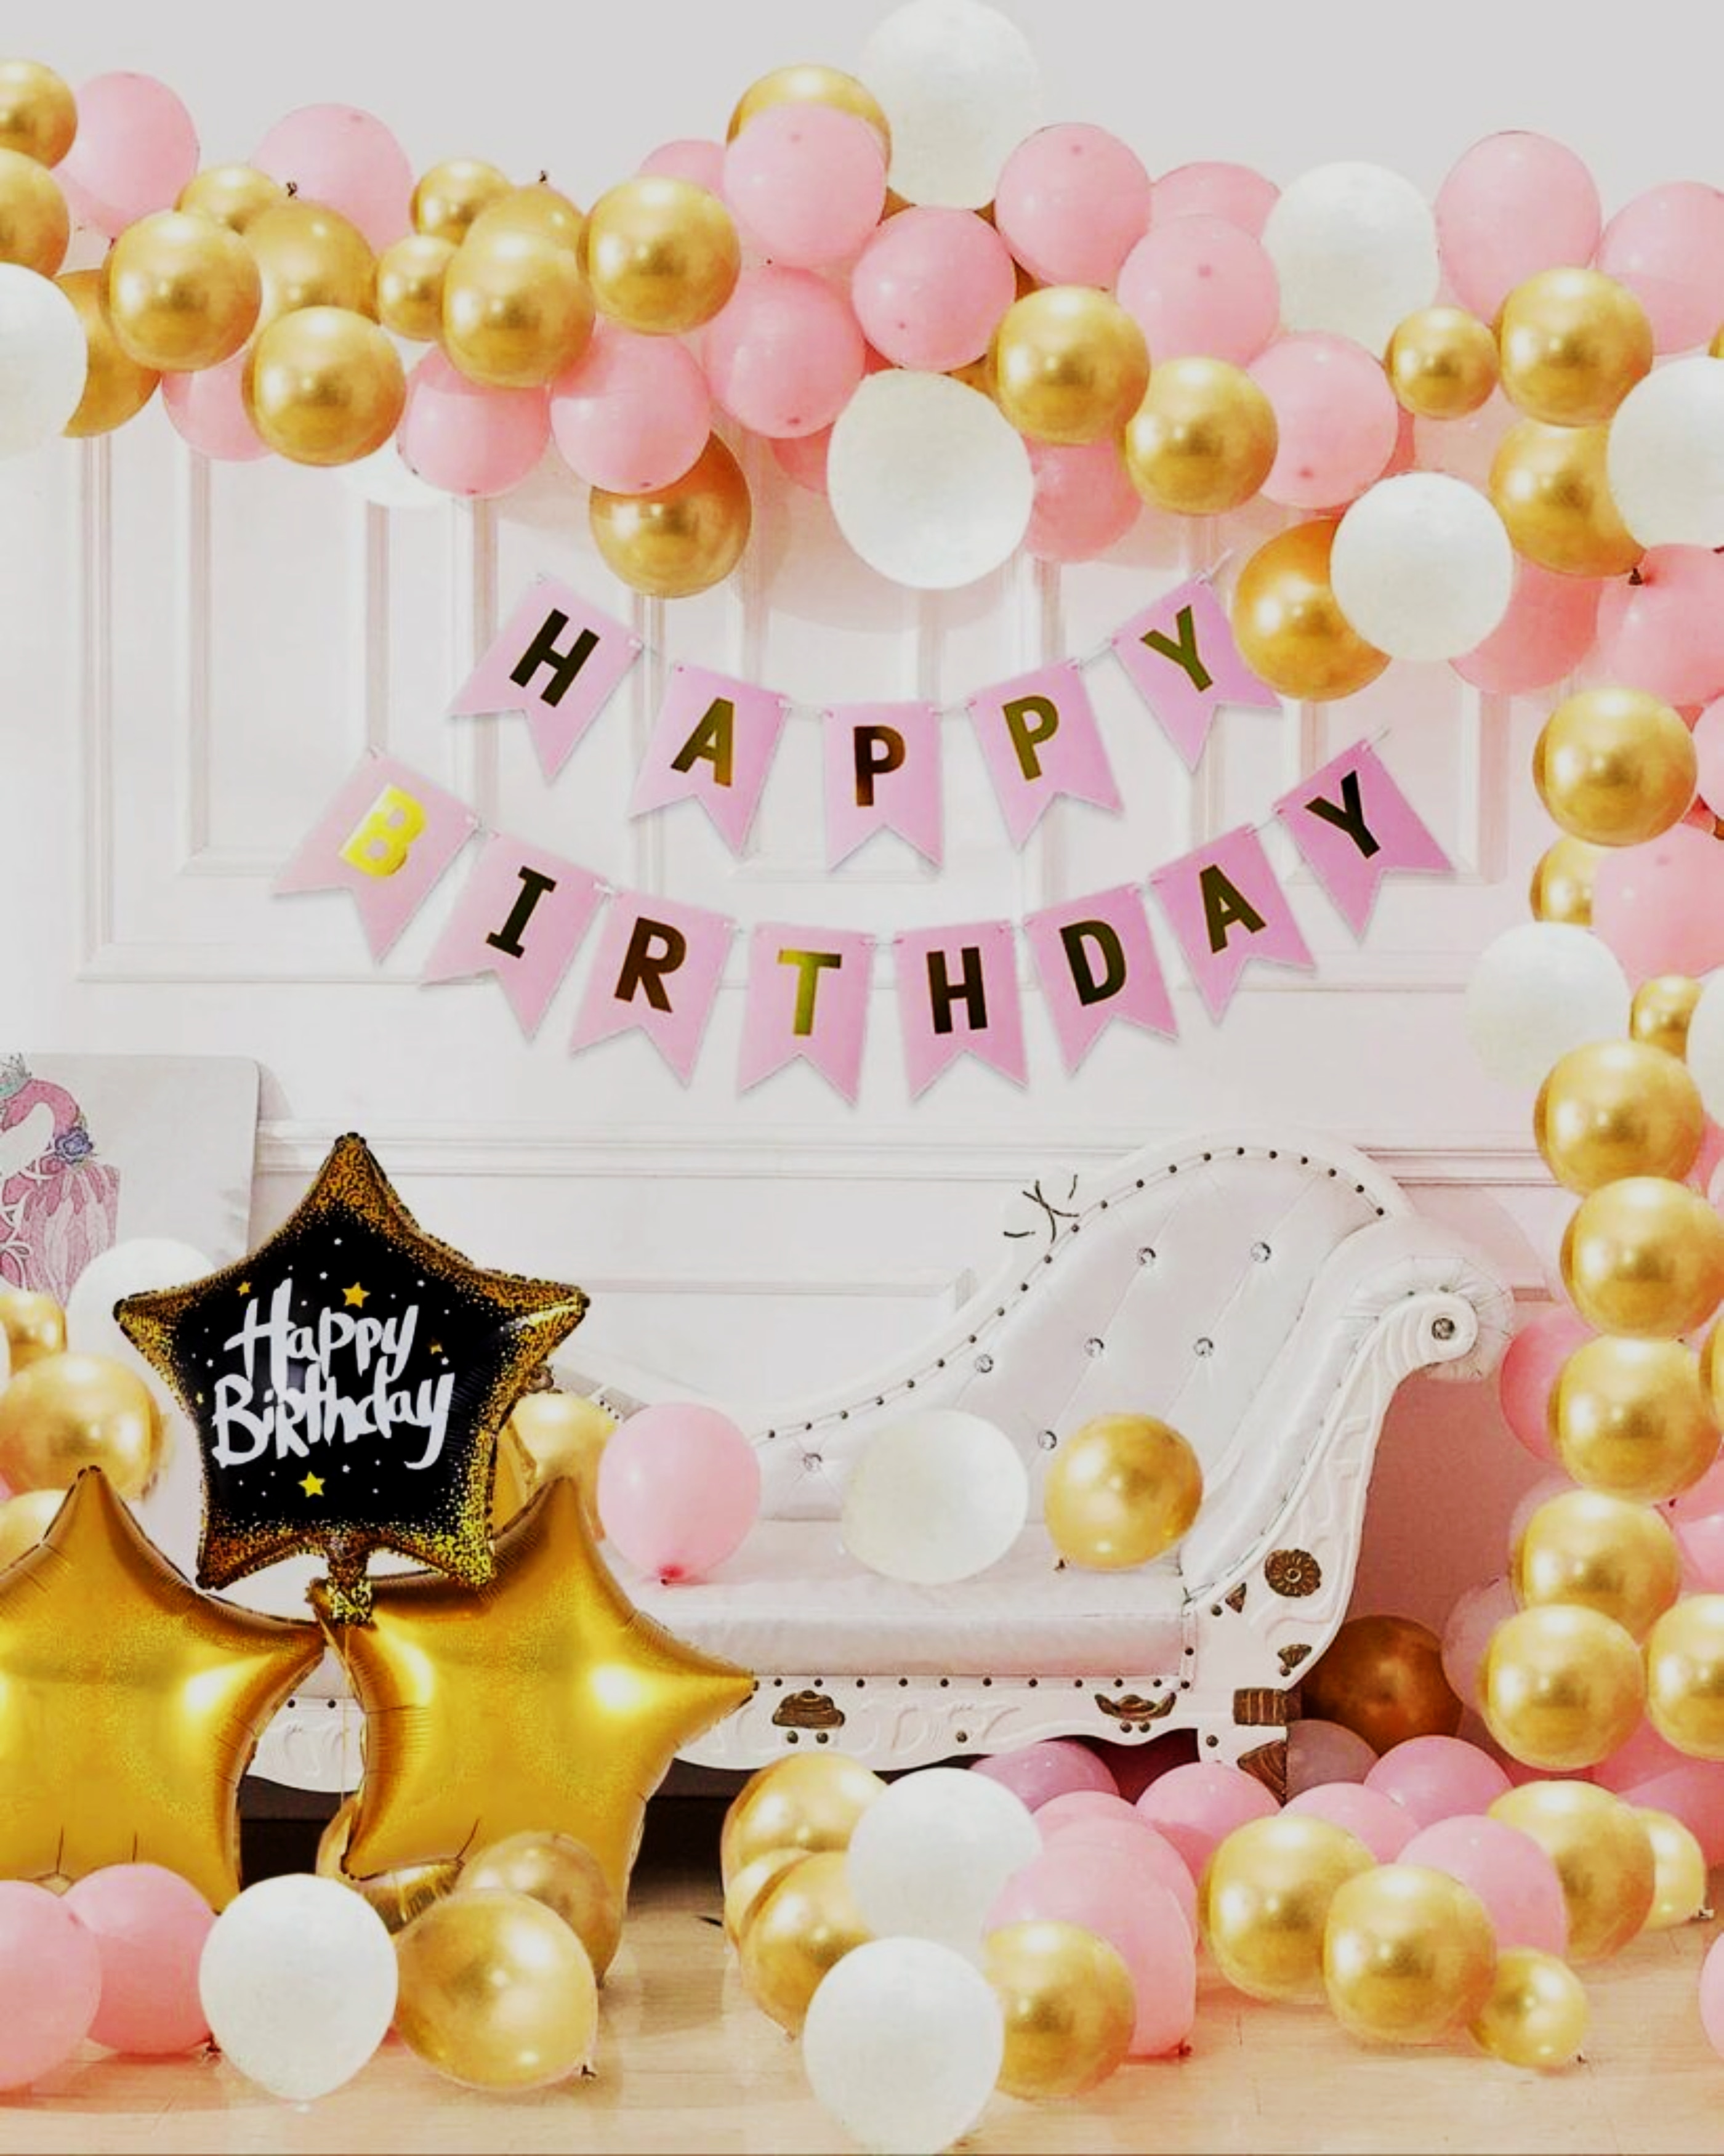 You are currently viewing Happy birthday image editing background download free